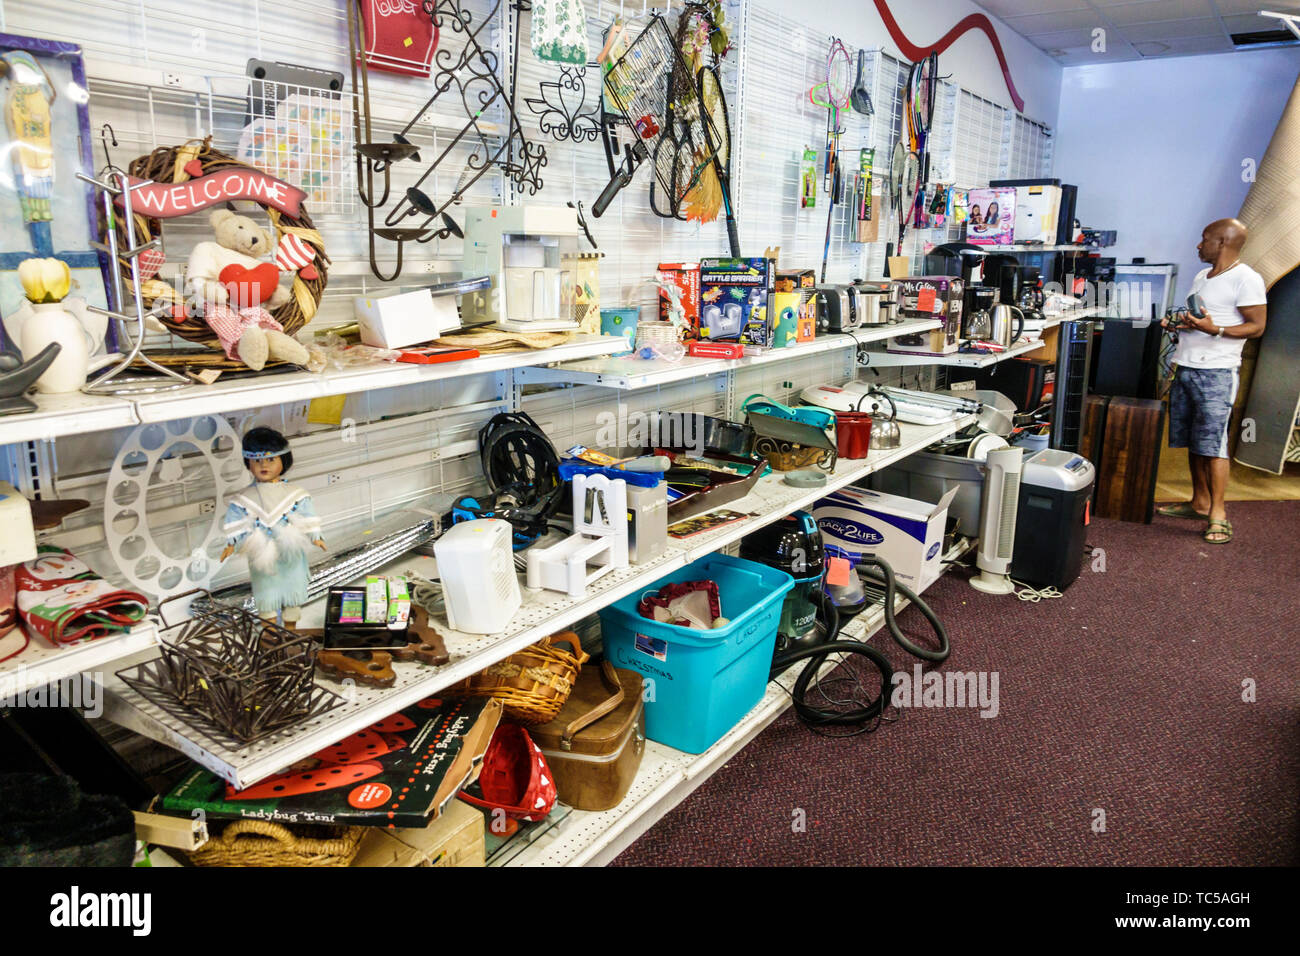 Miami Florida,Salvation Army Family Store,used clothing furniture household items,for sale donated donations low income,shopping shopper shoppers shop Stock Photo